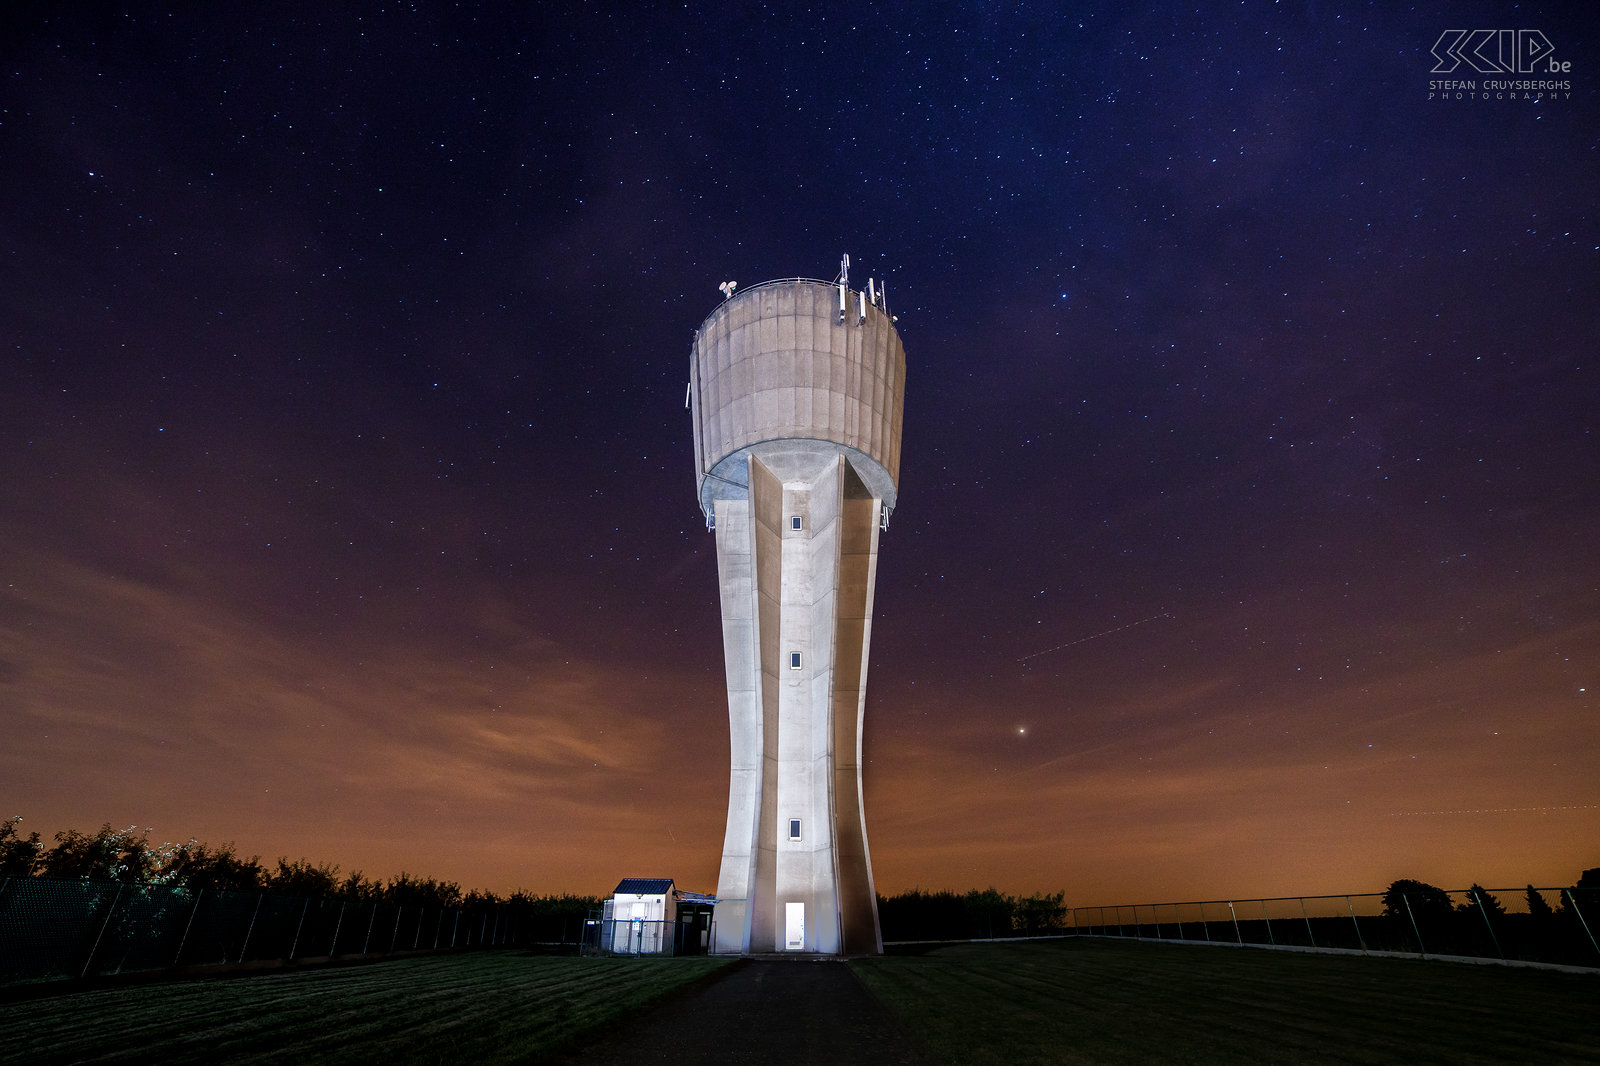 Hageland by night - Water tower of Bekkevoort The impressive water tower of Bekkevoort is located on top of a hill and therefore visible from a wide distance. Stefan Cruysberghs